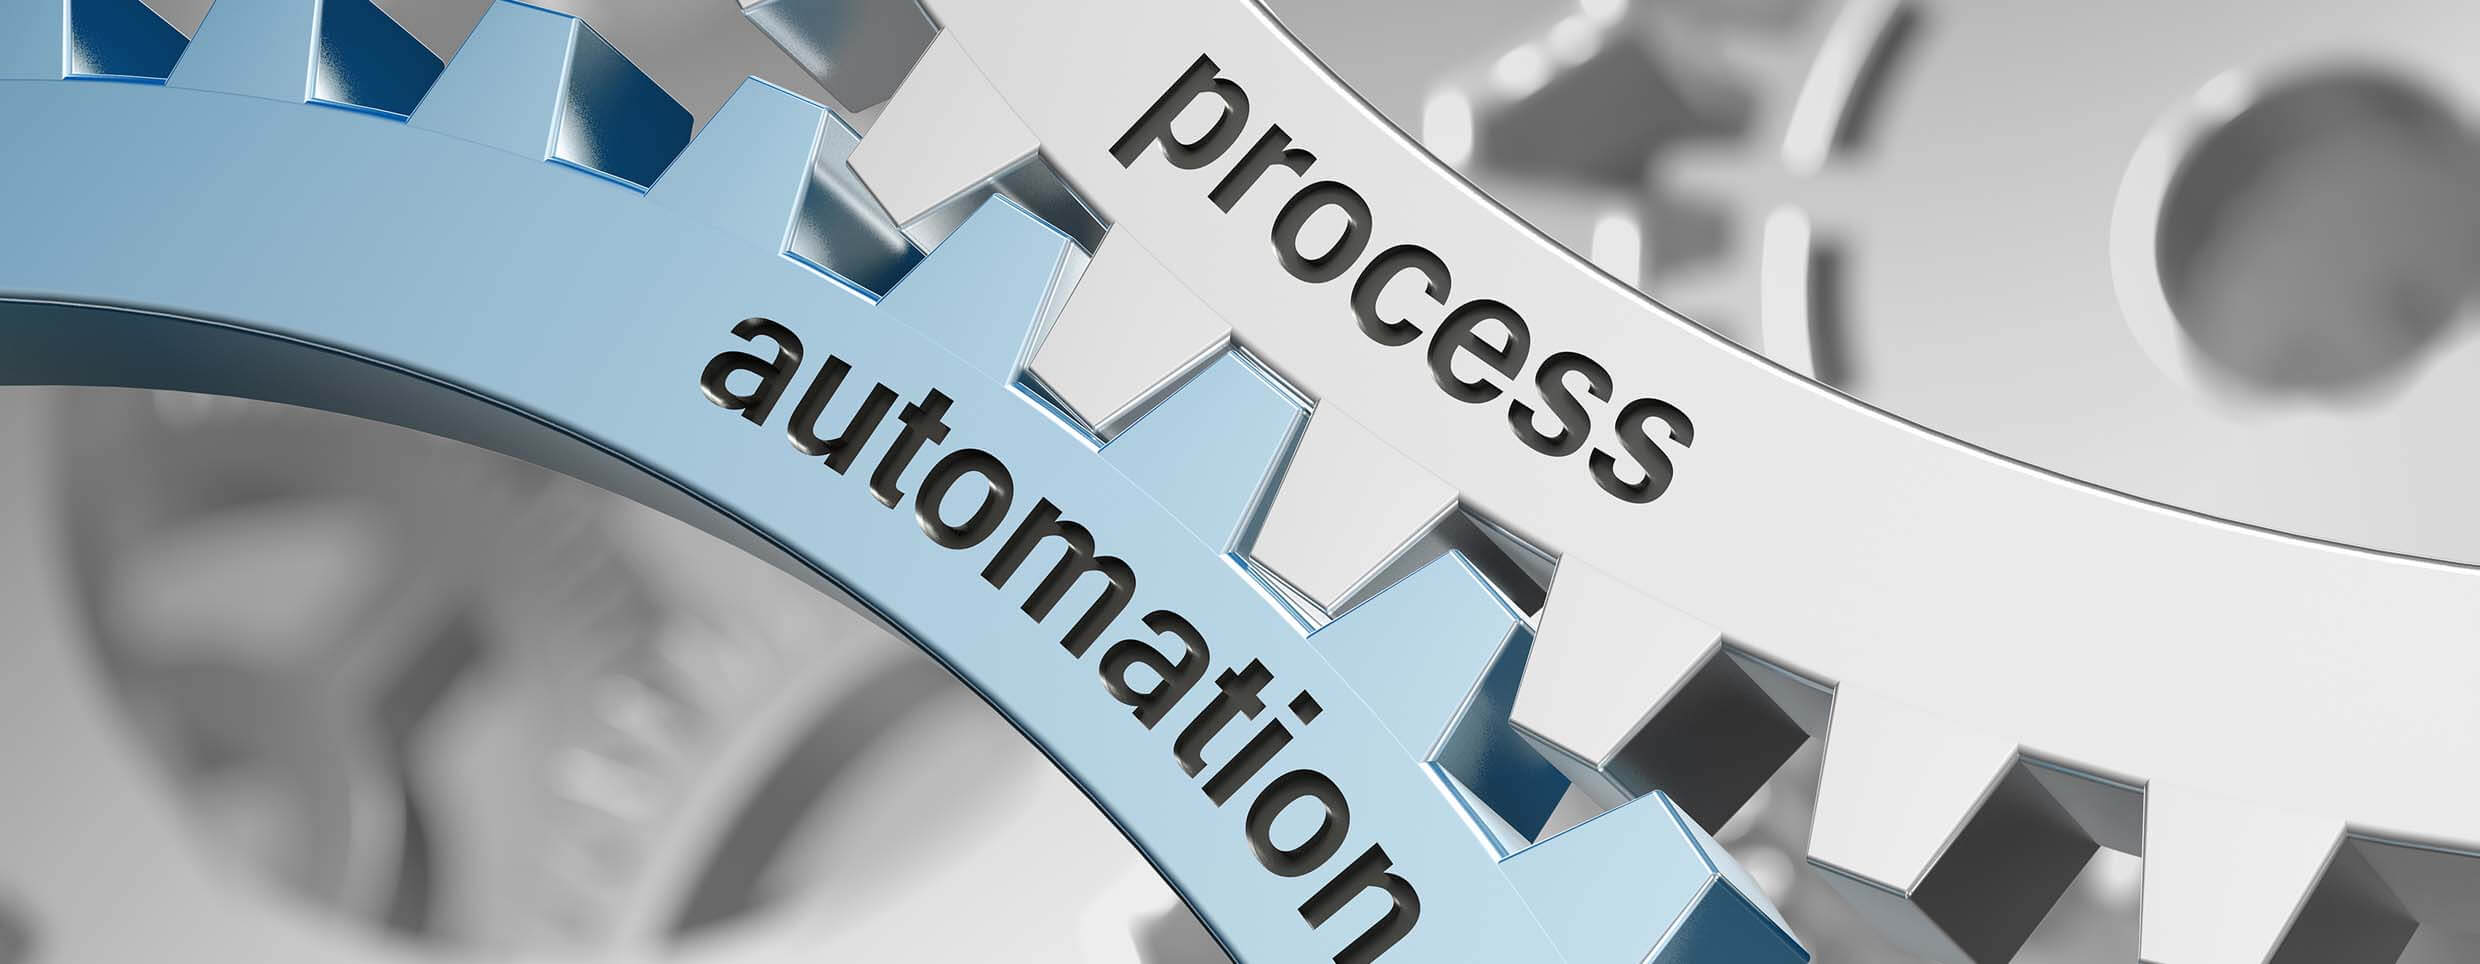 Why do we need the automation of processes in HR?